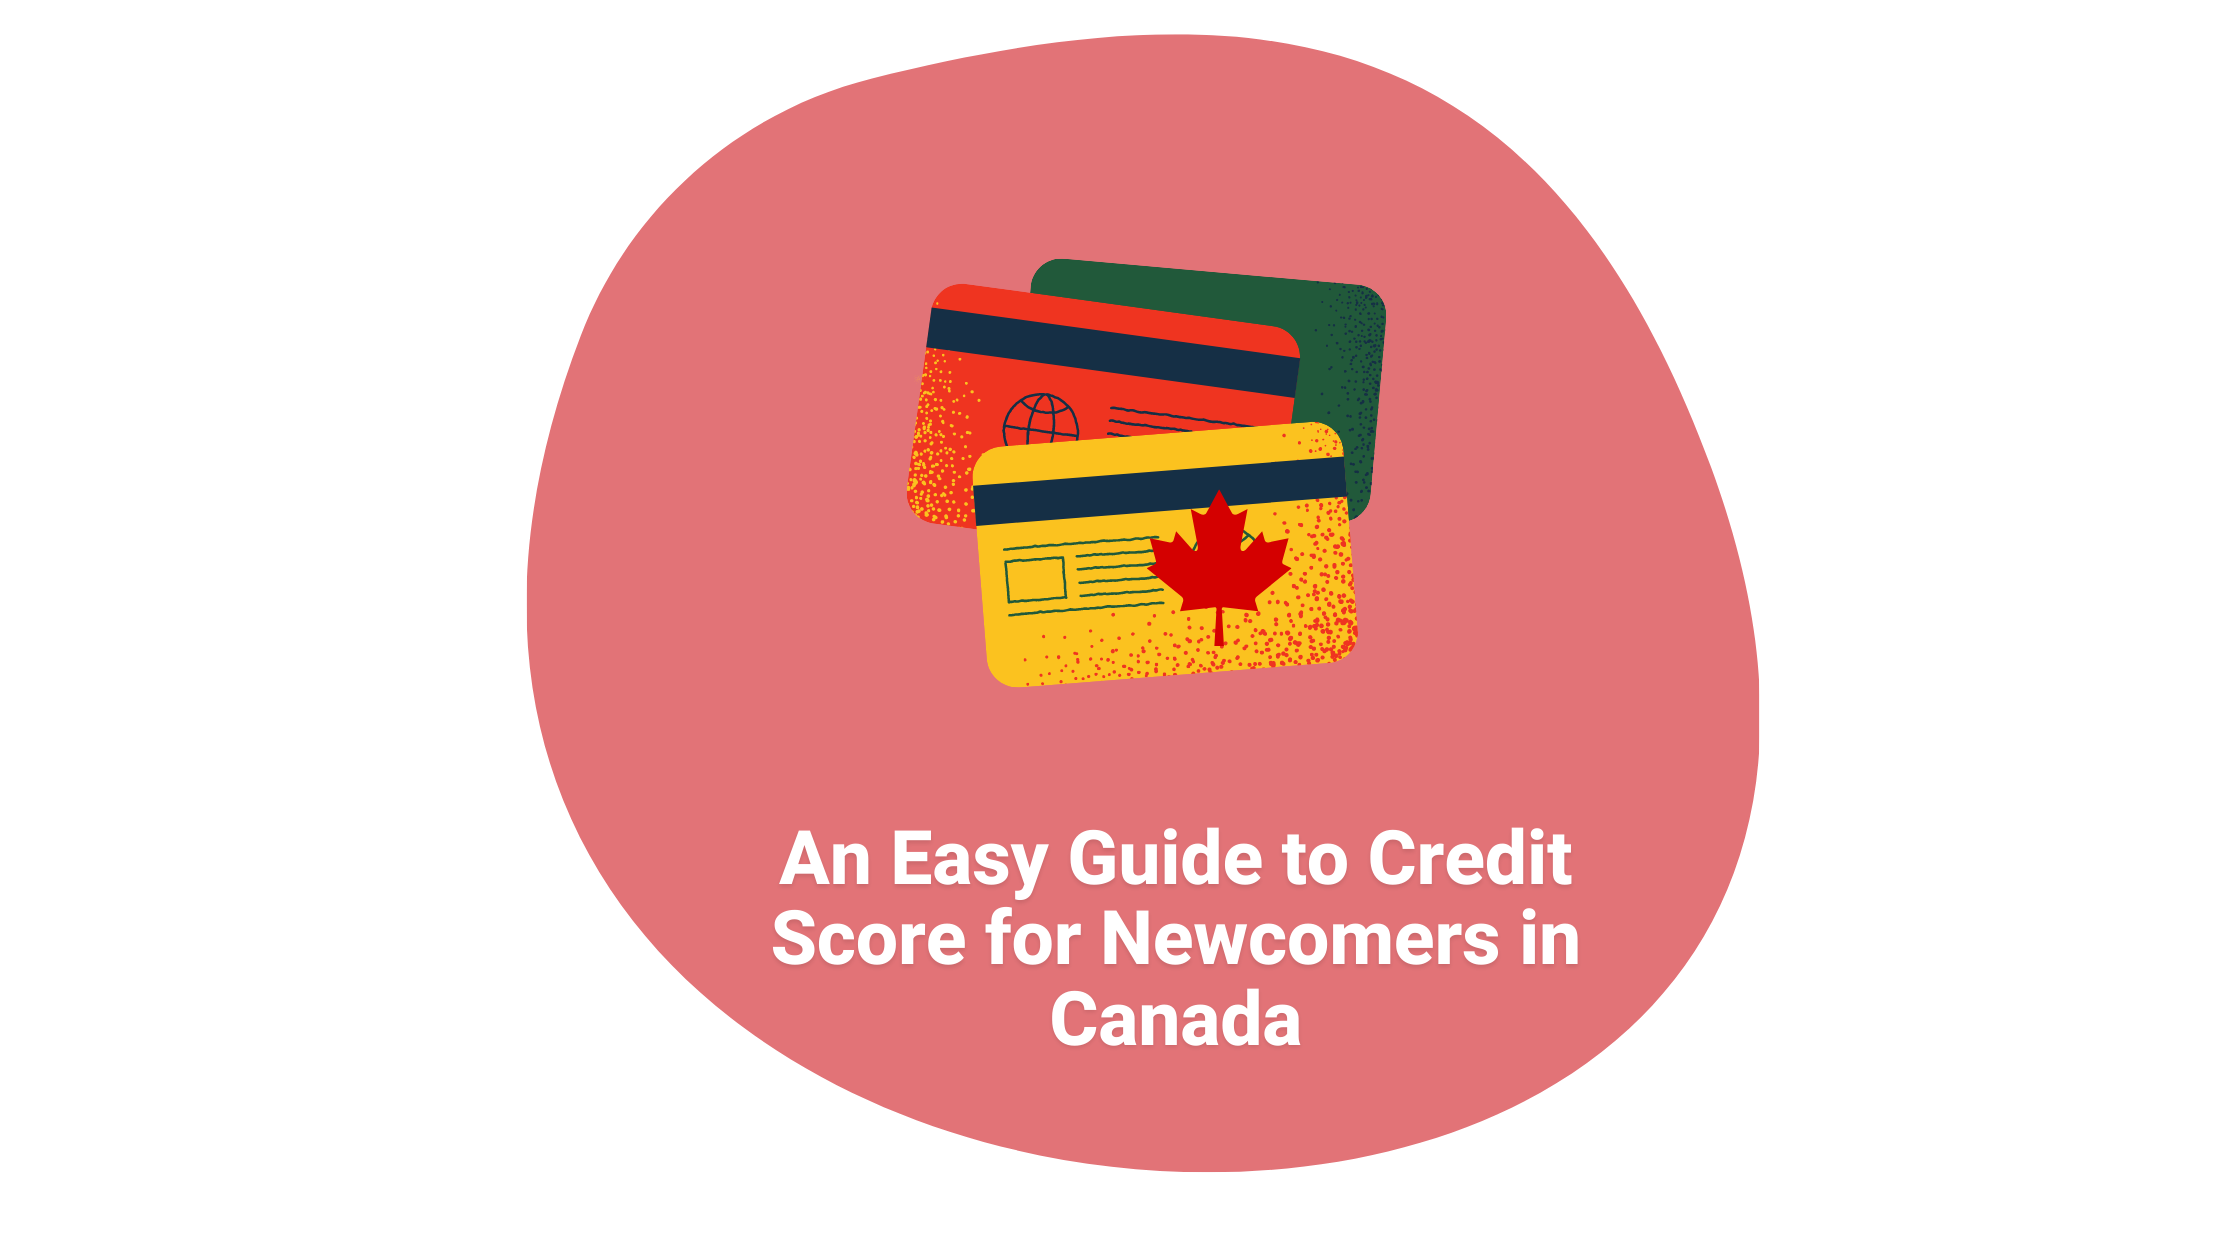 An Easy Guide to Credit Score for Newcomers in Canada